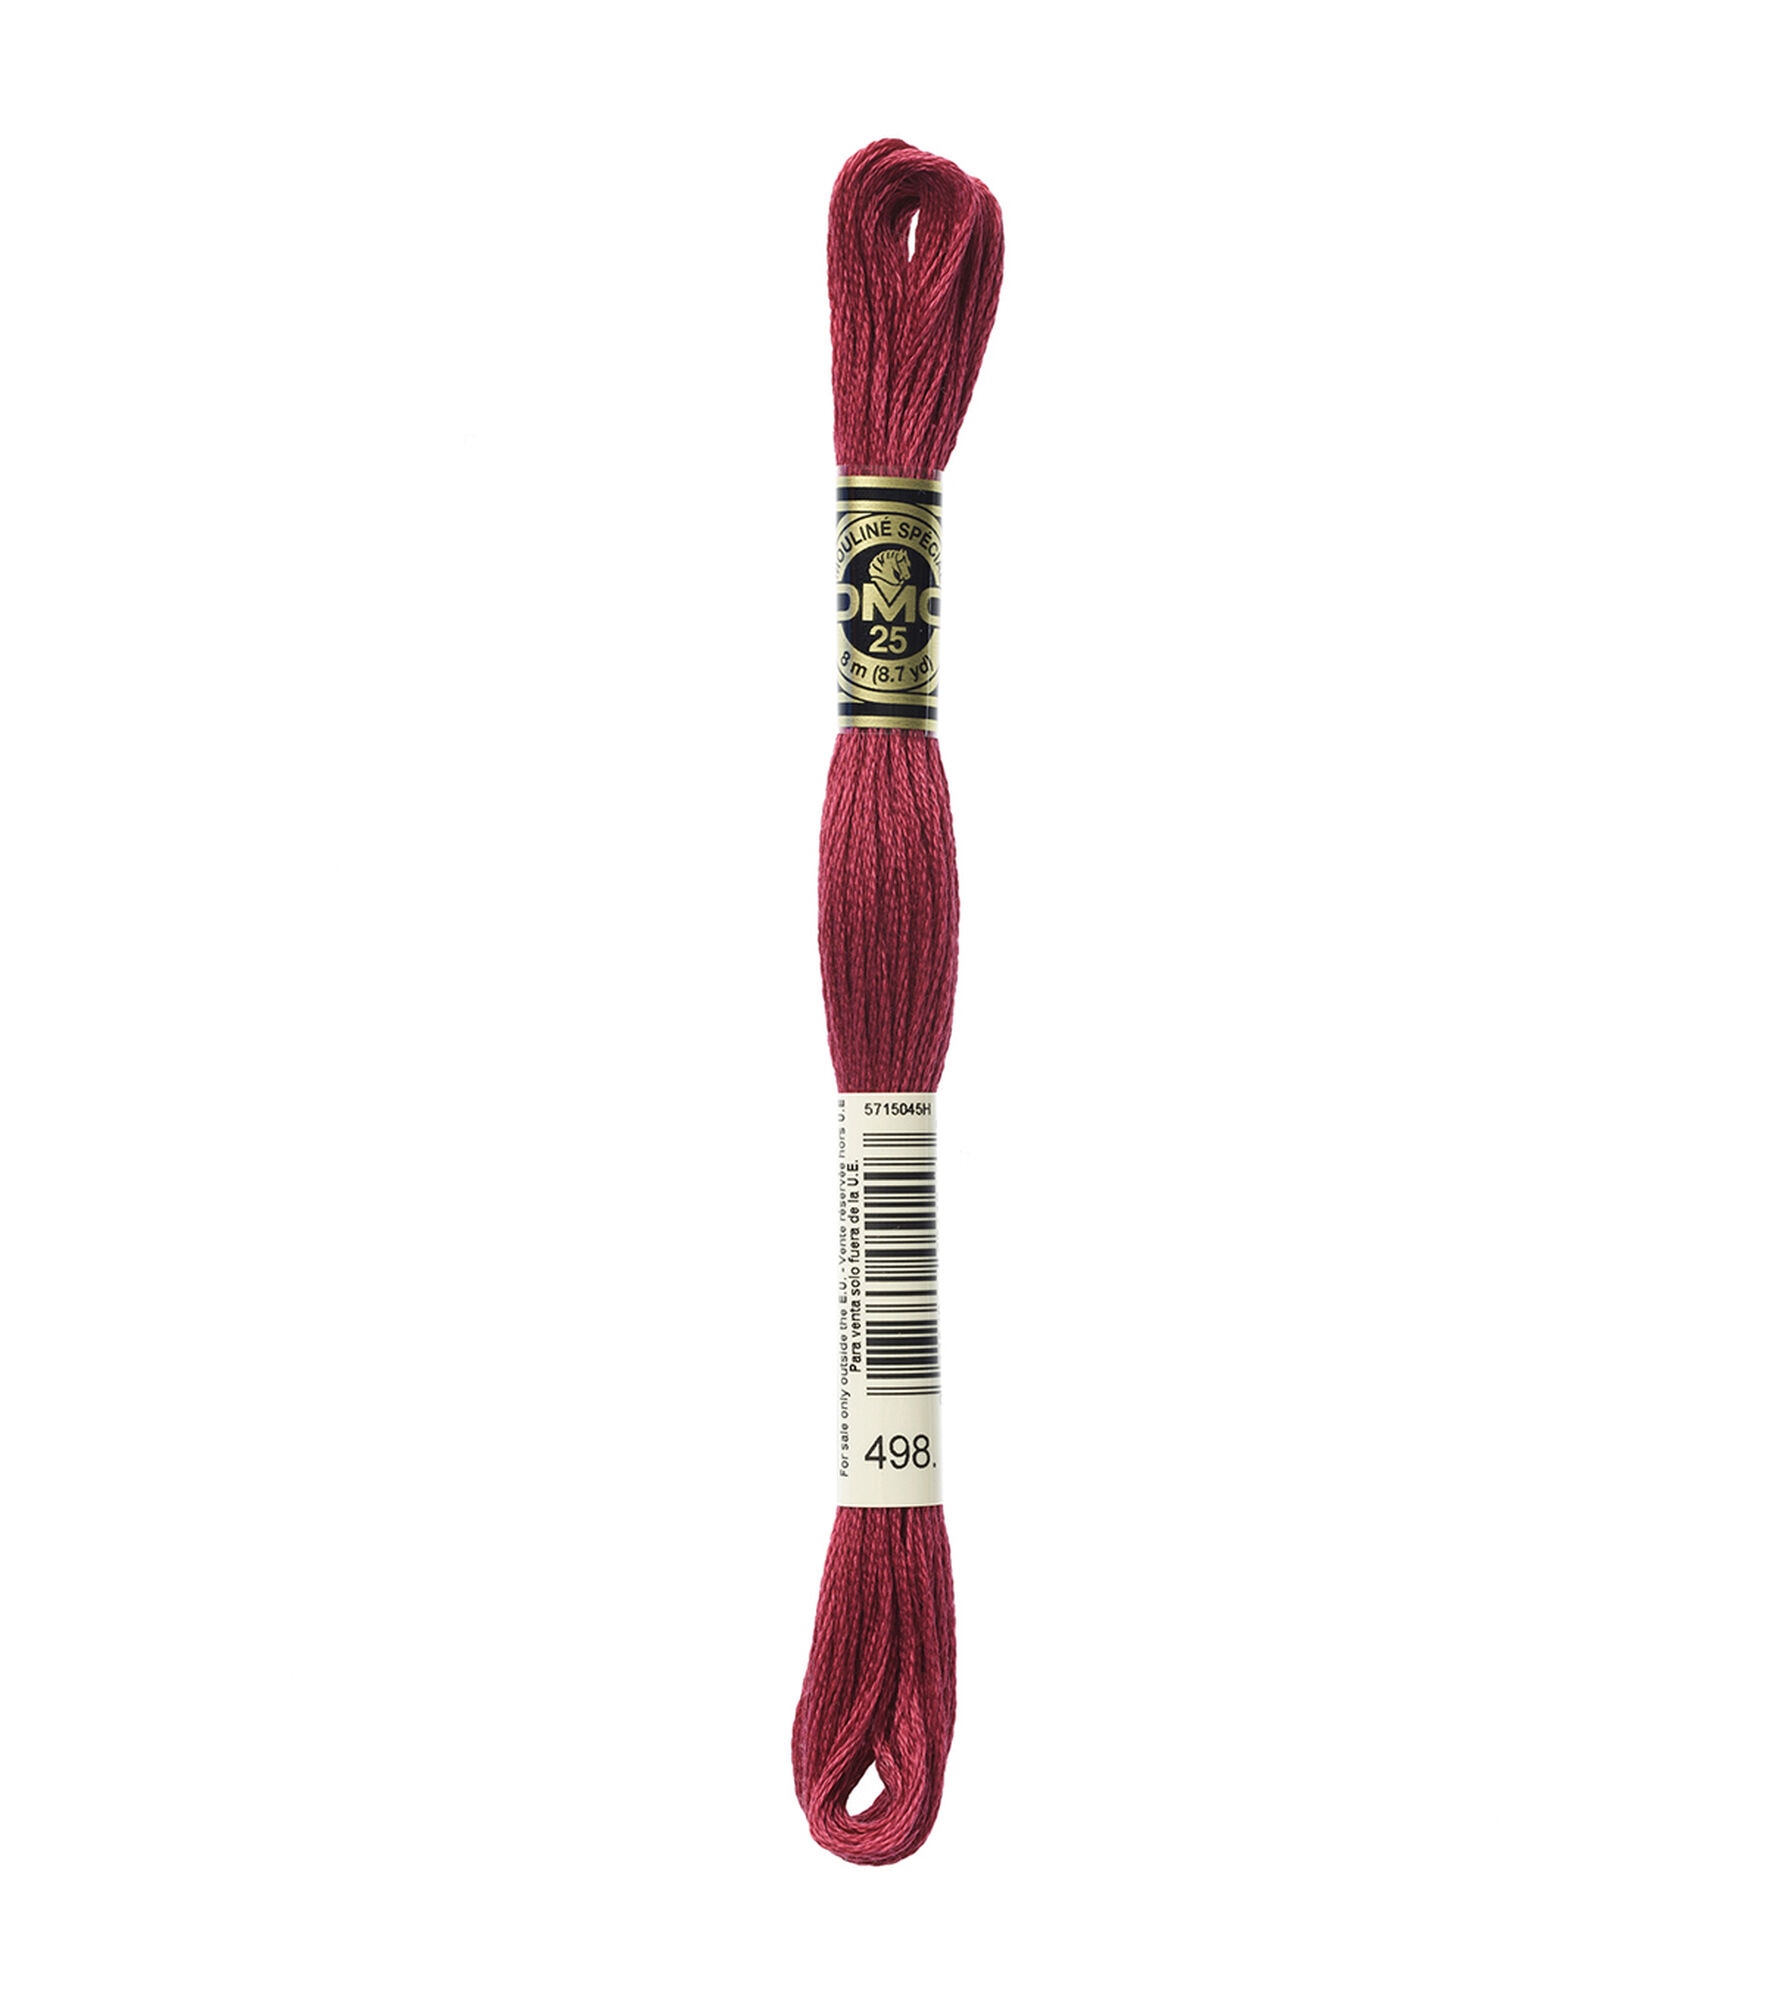 DMC 8.7yd Red & Oranges 6 Strand Cotton Embroidery Floss, 498 Dark X-mas Red, hi-res